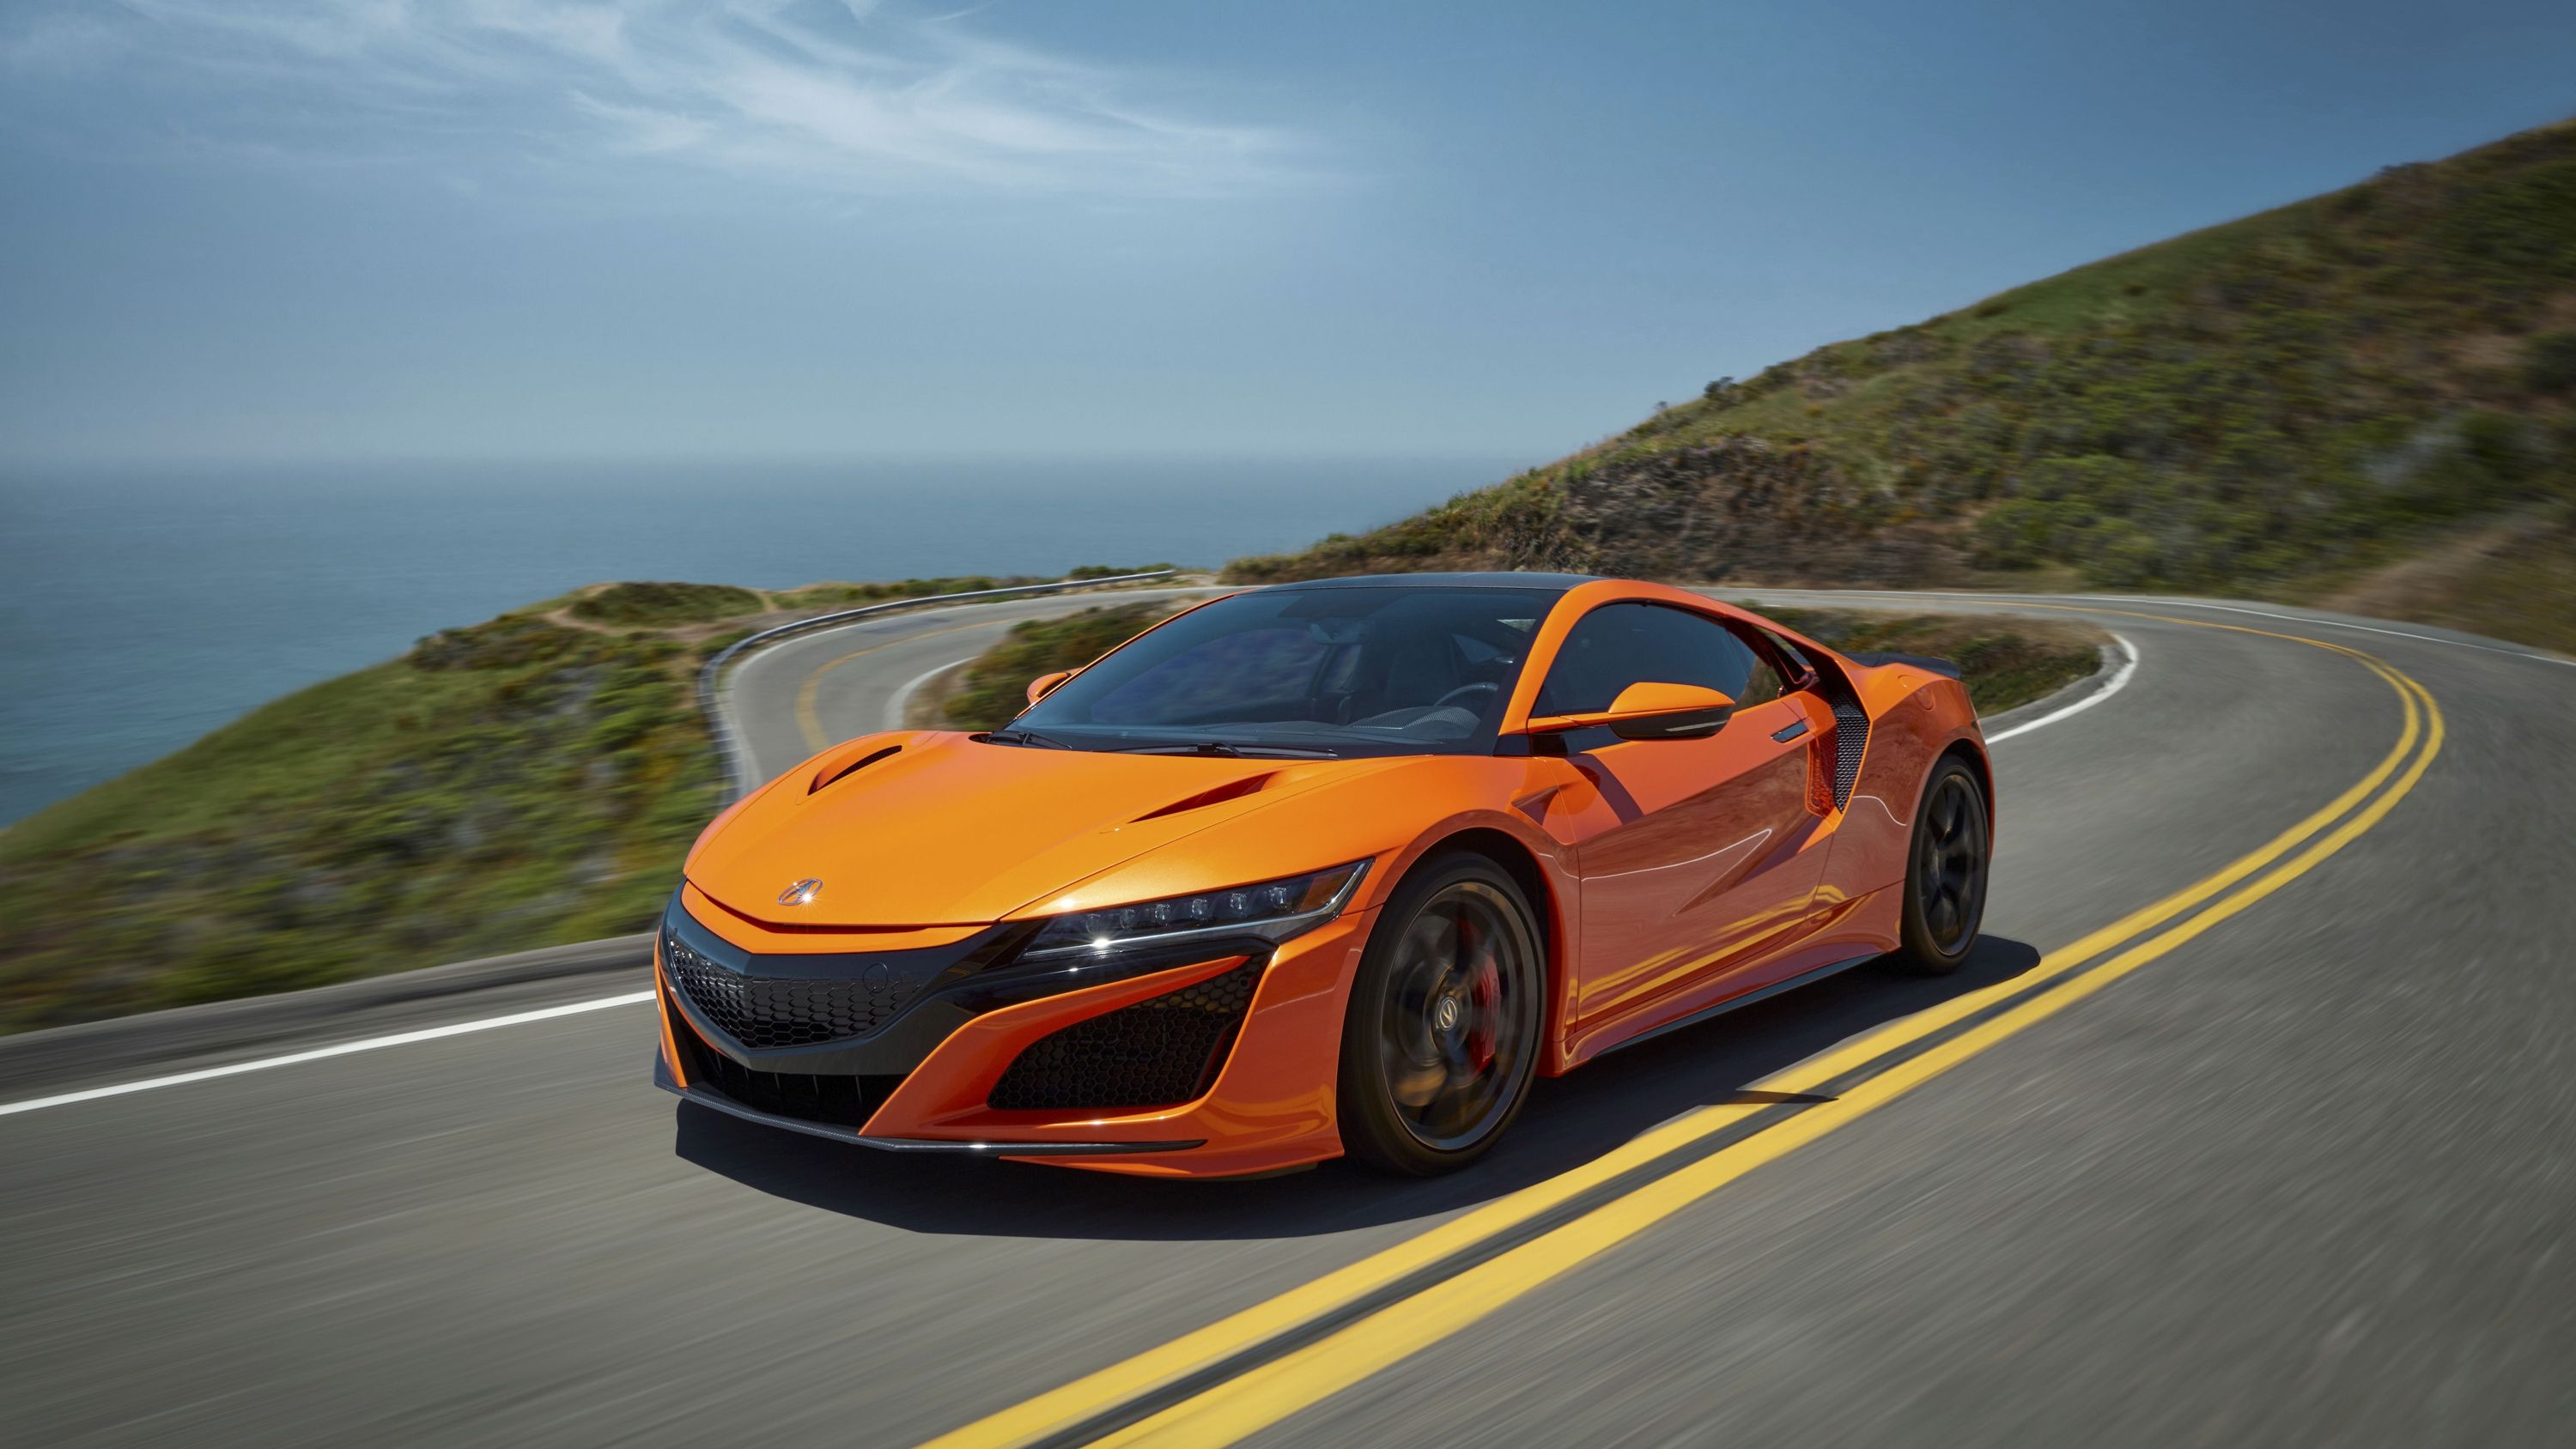 Orange 2019 Acura NSX driving along a highway